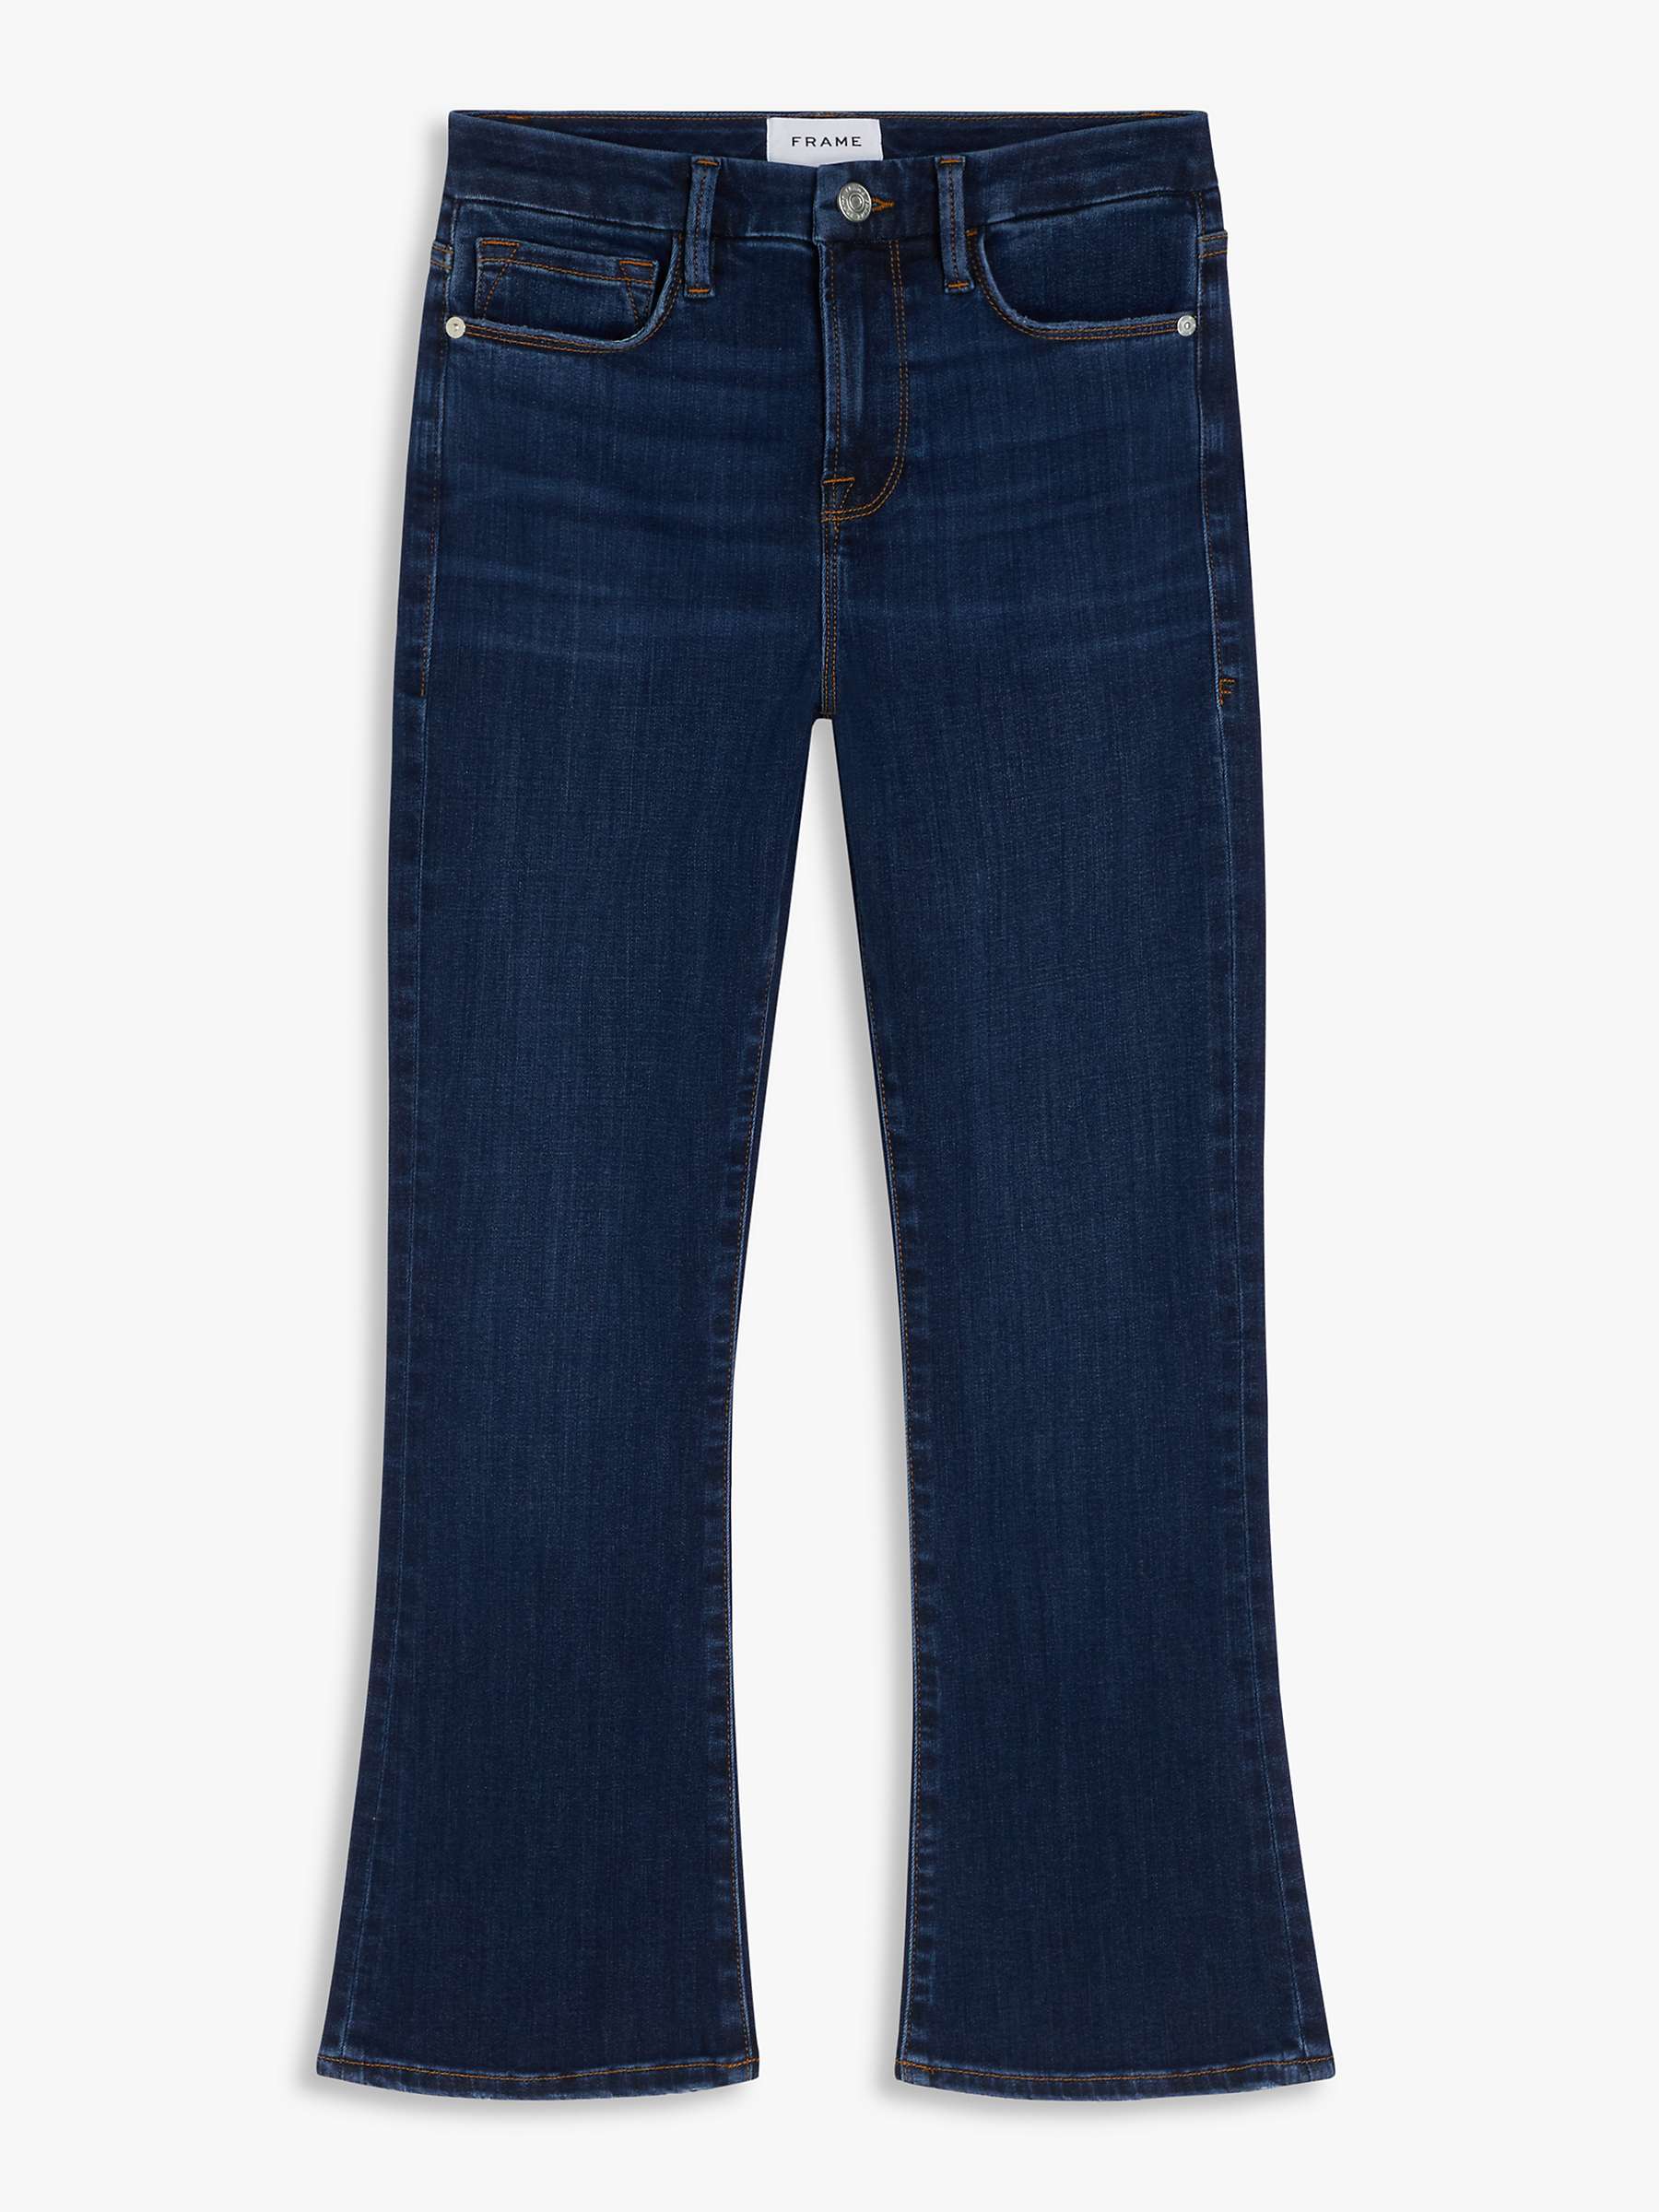 Buy FRAME Le Crop Mini Bootcut Jeans, Majesty Online at johnlewis.com